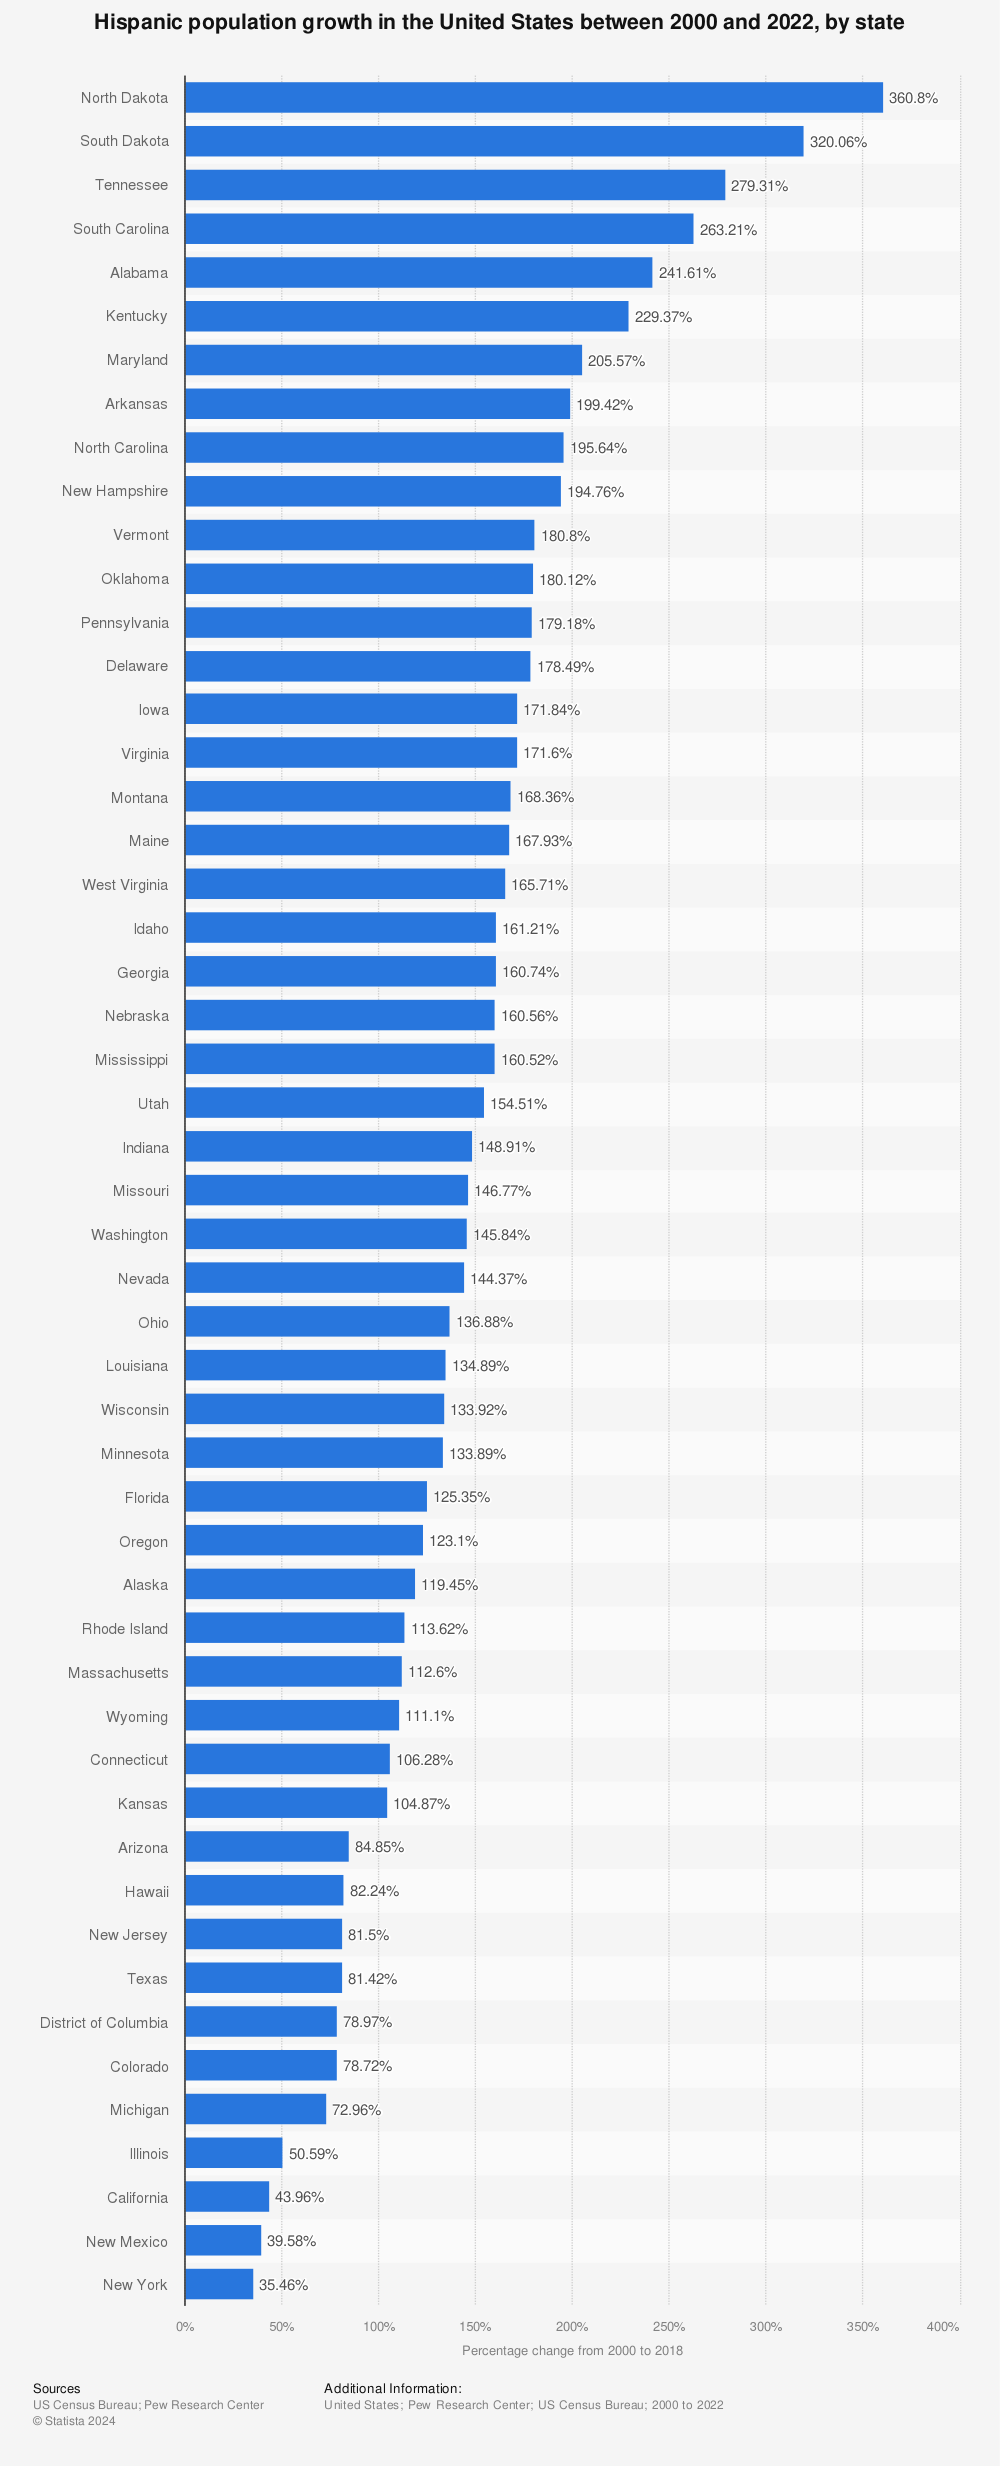 Statistic: Hispanic population growth in the United States between 2000 and 2019, by state | Statista